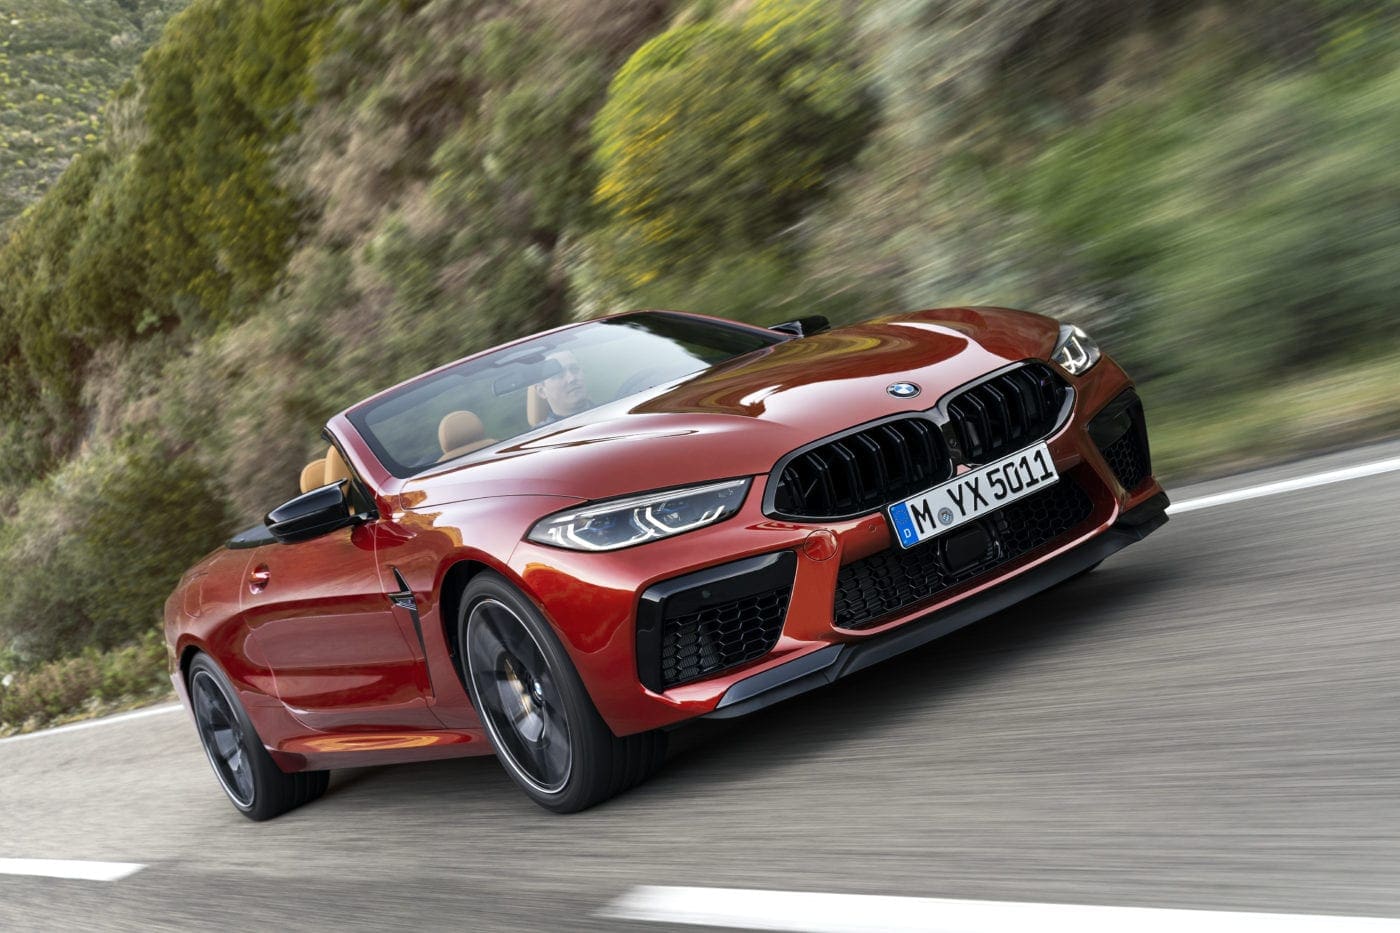 BMW M GmbH is “Most Successful Company” in Their Segment